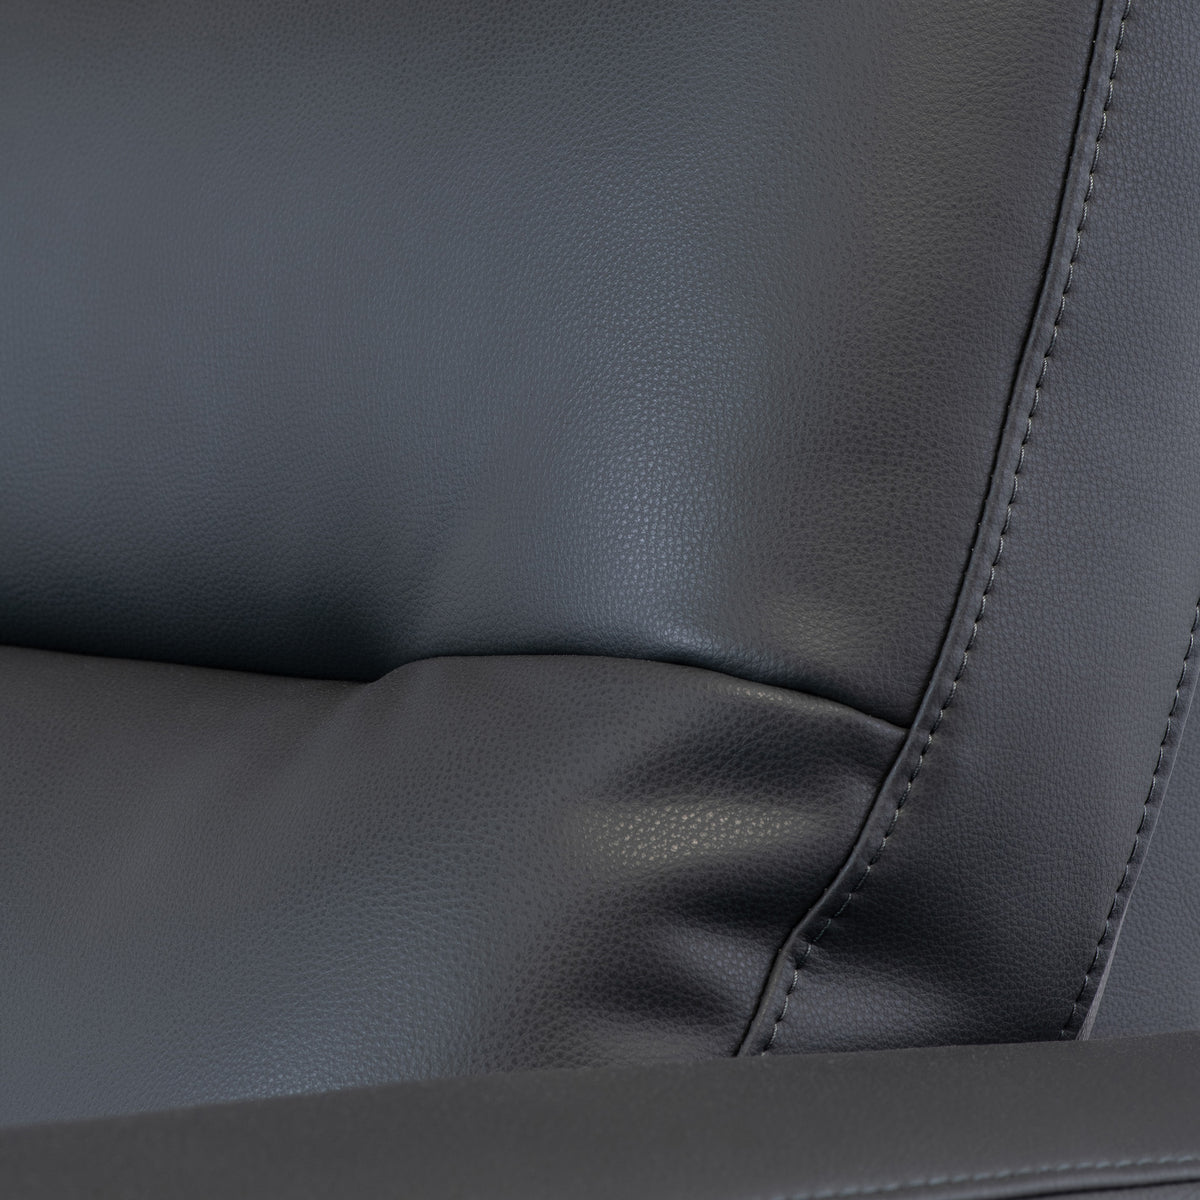 Harlem Charcoal Leather Electric Reclining Armchair from Roseland Furniture